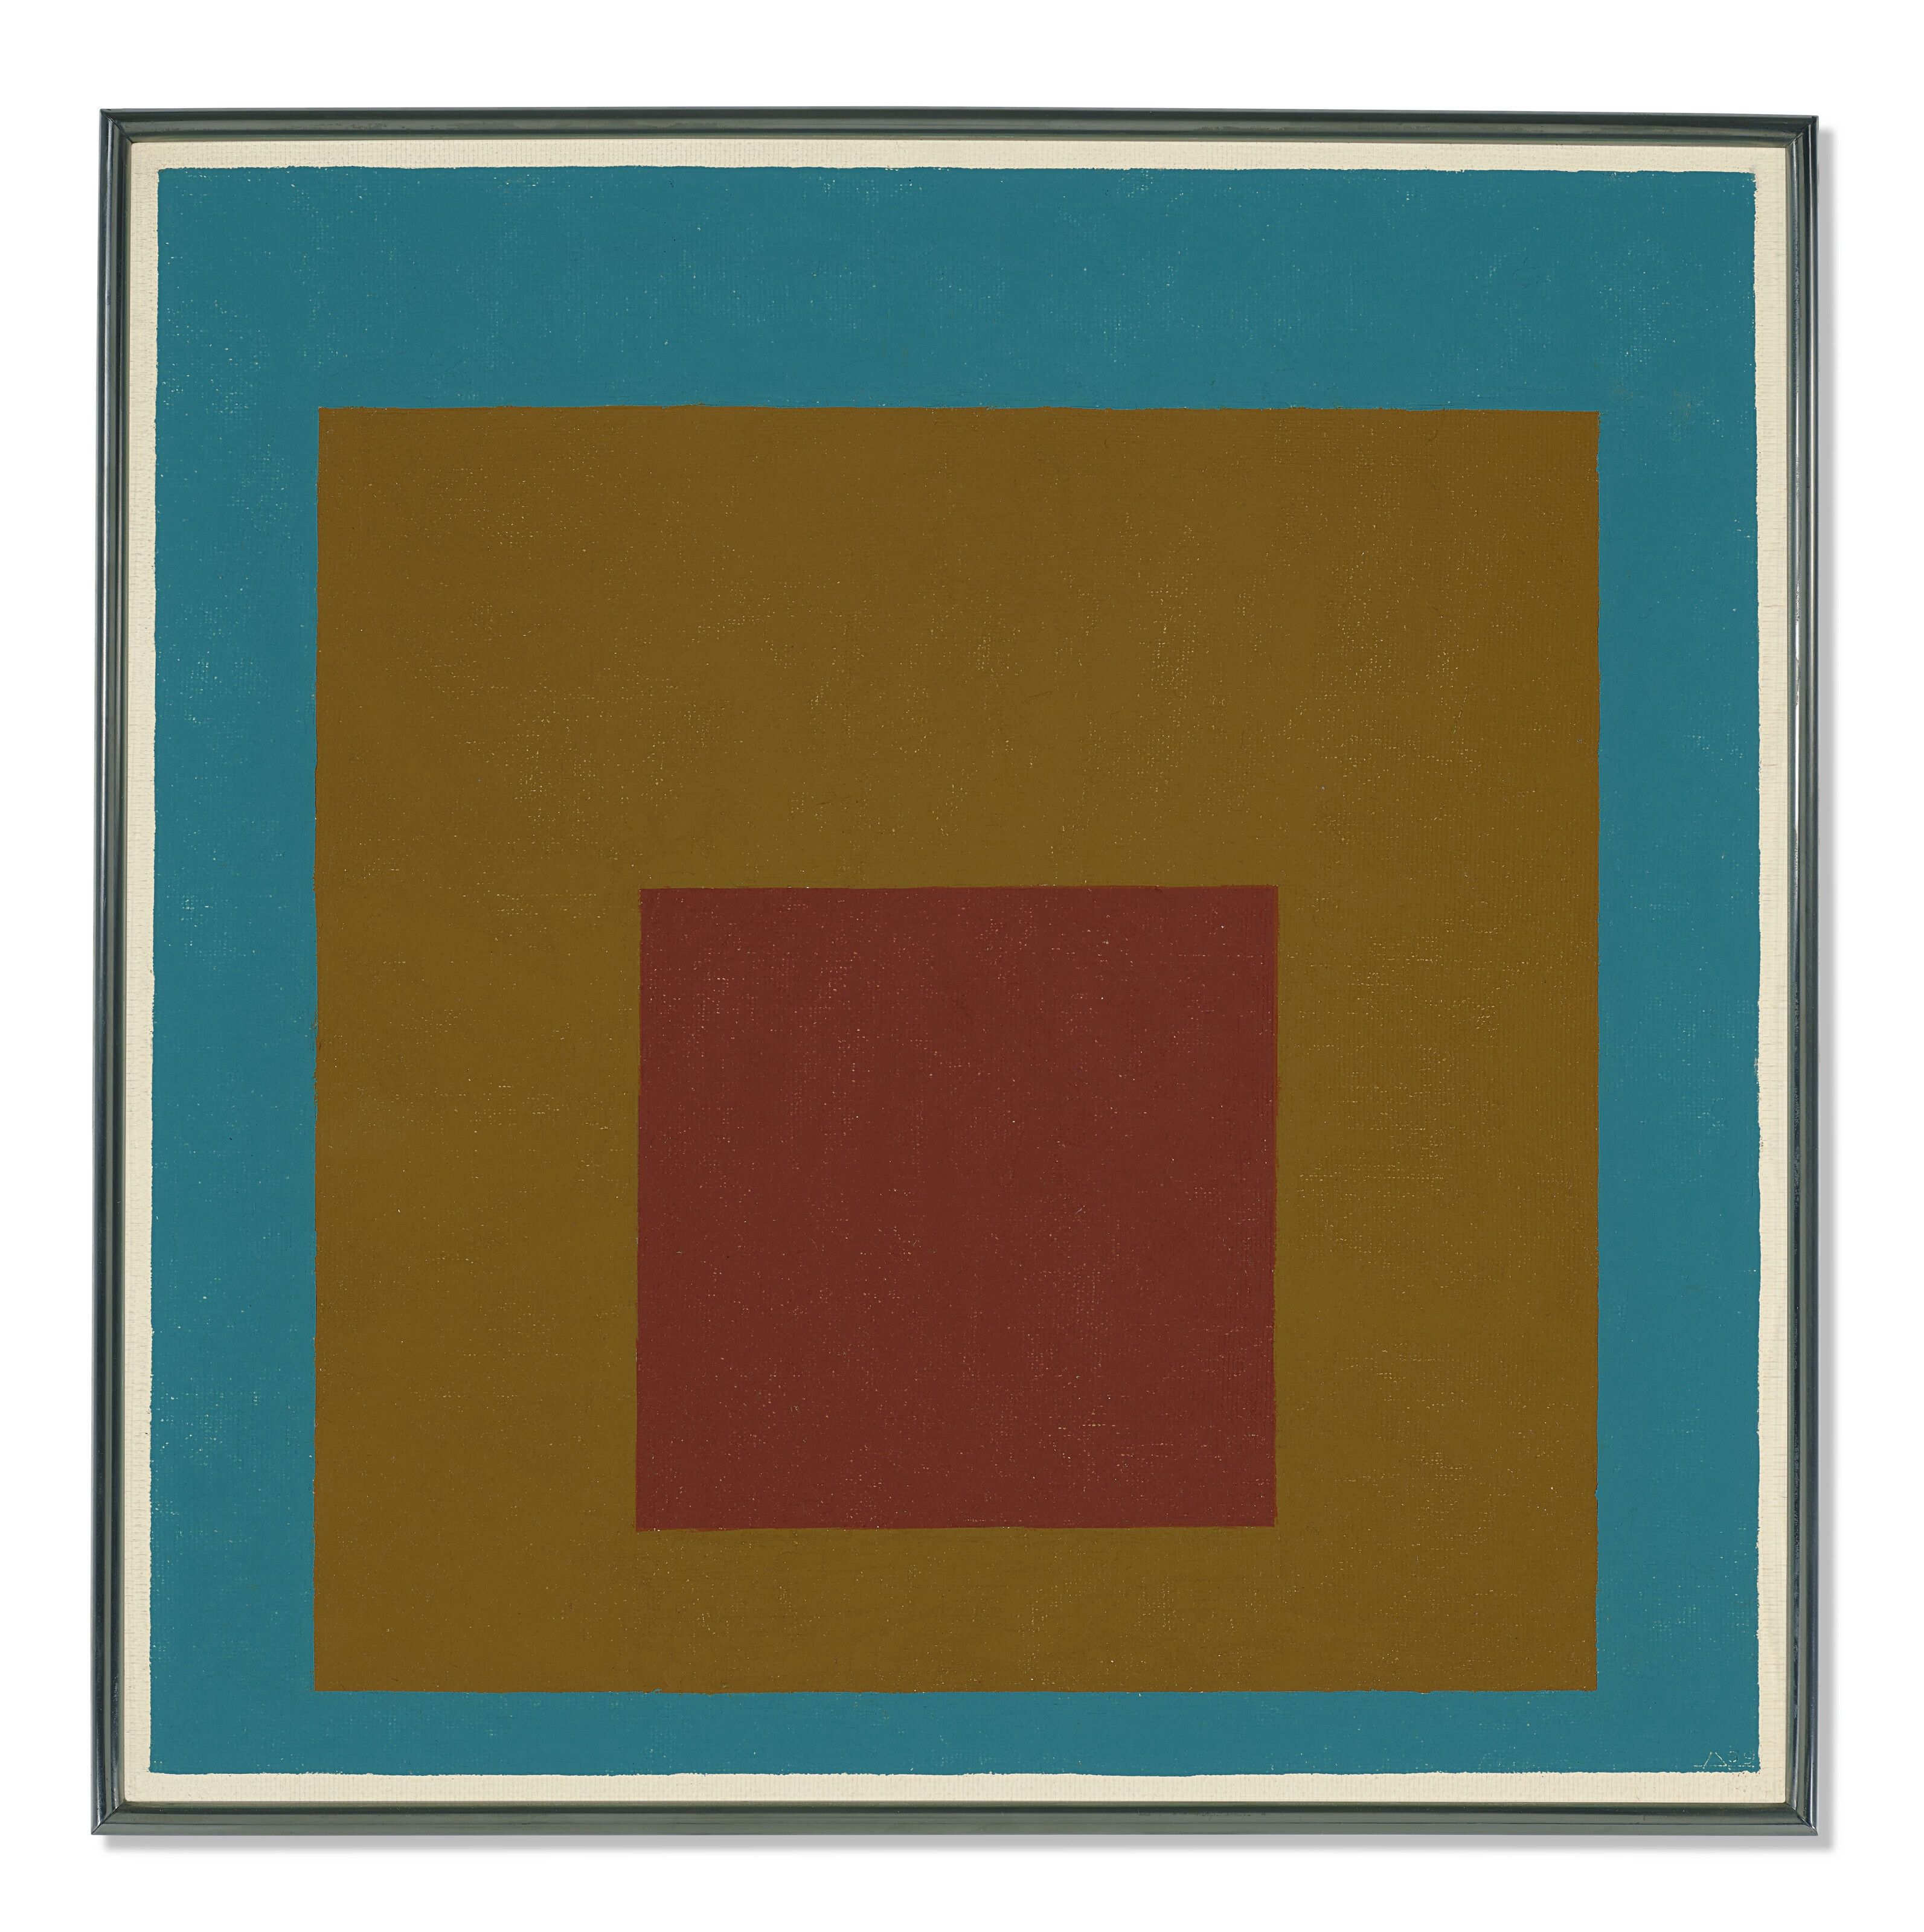 Homage to the Square by Josef Albers, Painted in 1959